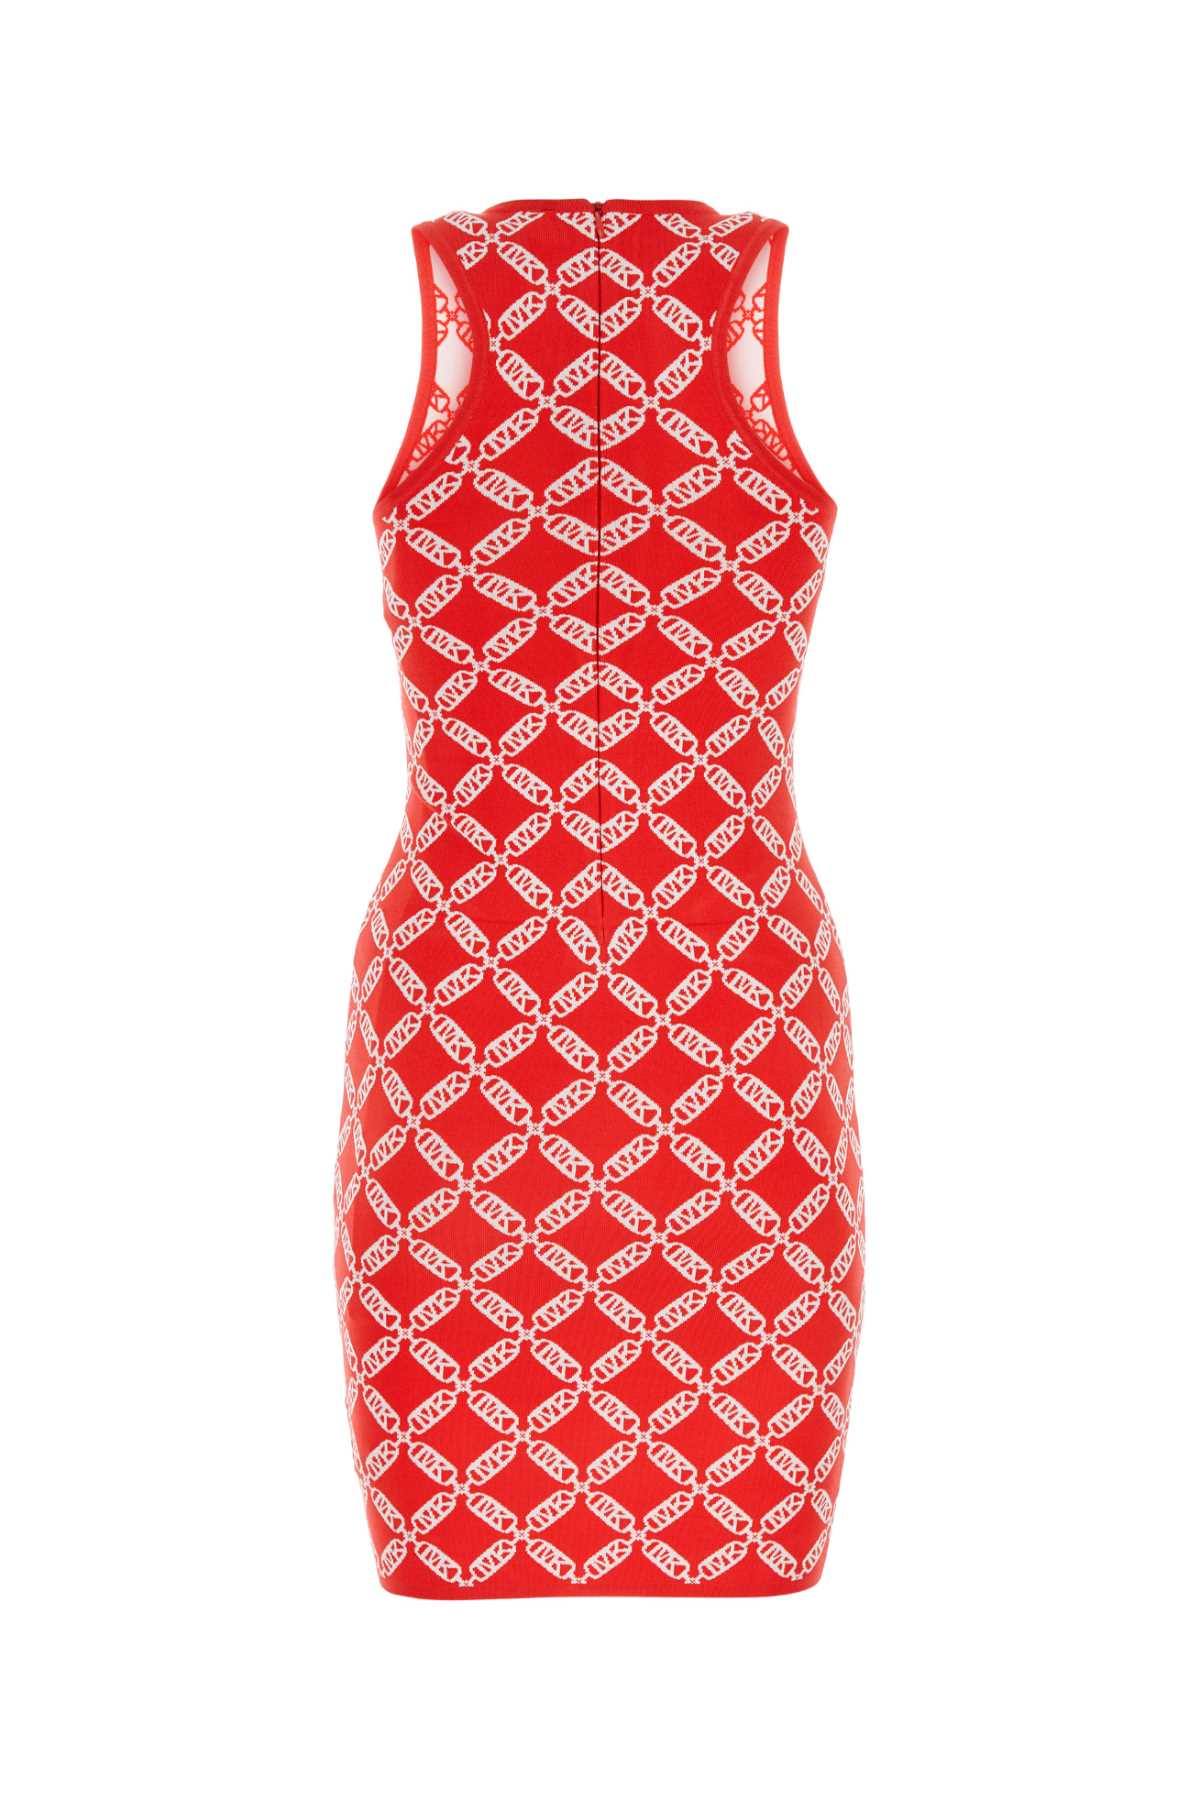 Michael Kors Embroidered Jacquard Mini Dress In Seacoral